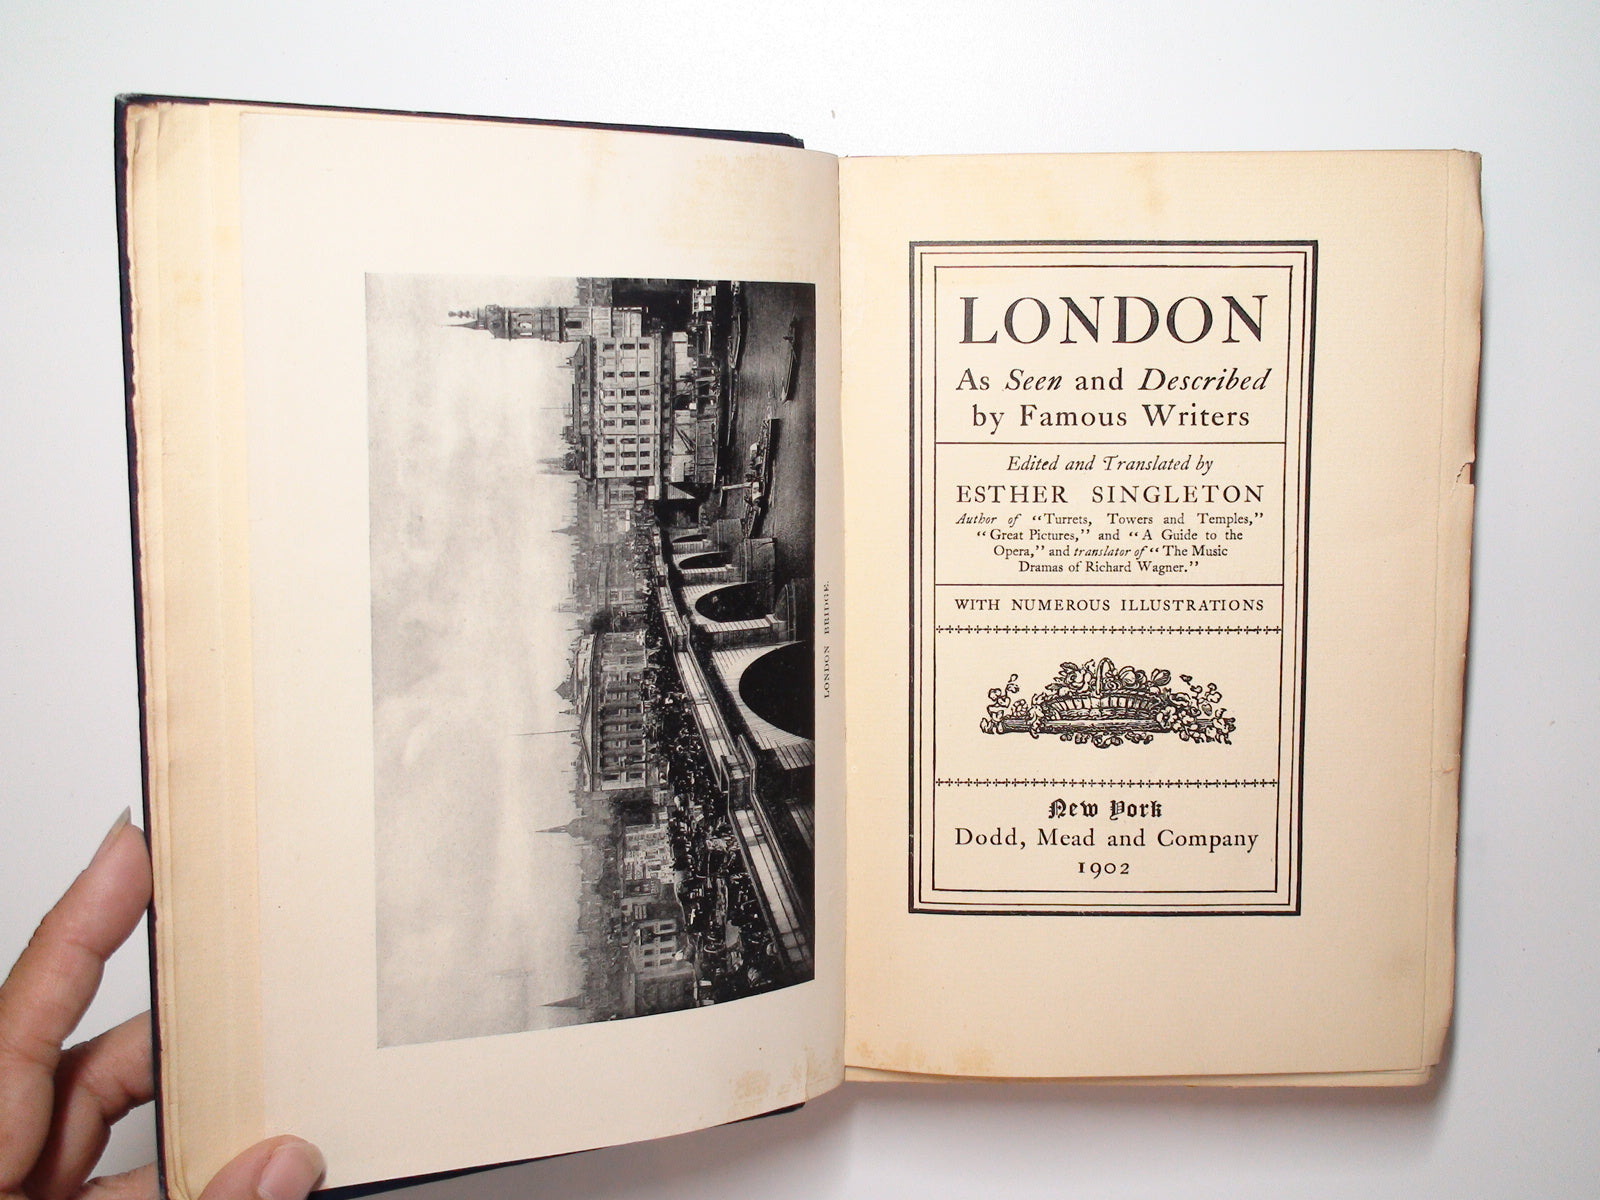 London, Described by Great Writers, Esther Singleton, Illustrated, 1st Ed, 1902